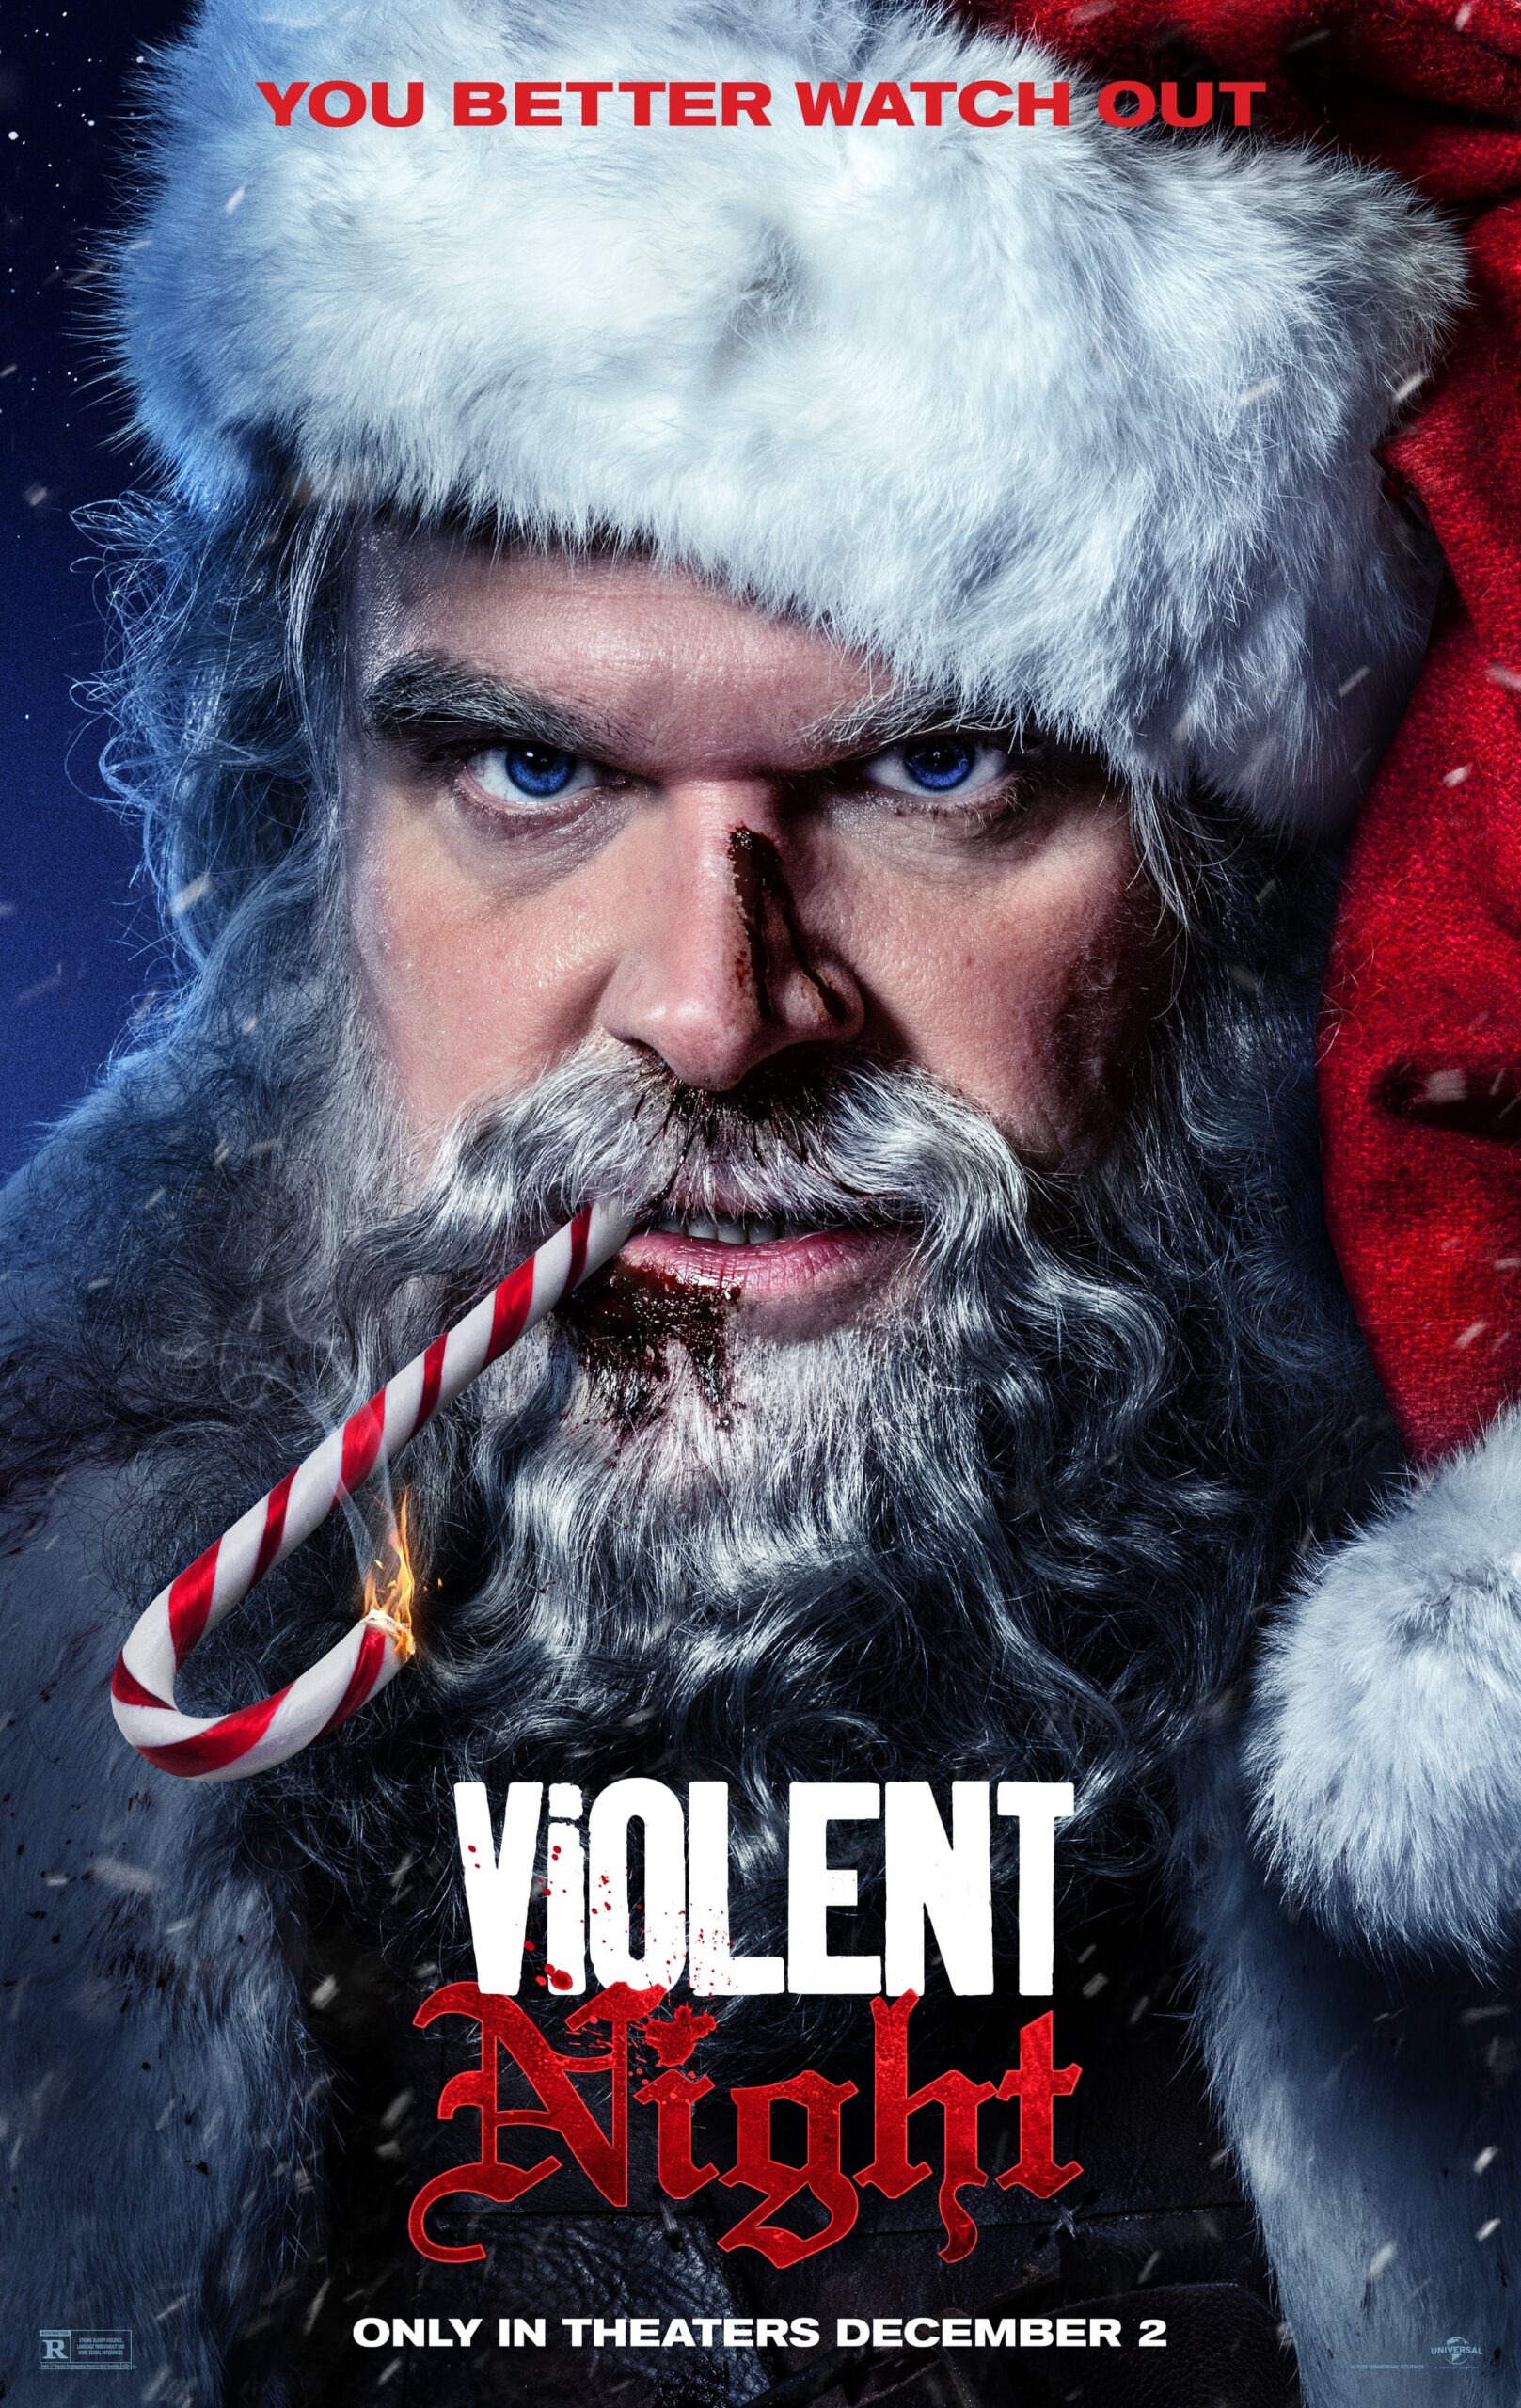 David Harbour’s Santa Cleans Up the Naughty List in the Action-Packed “Violent Night” Trailer